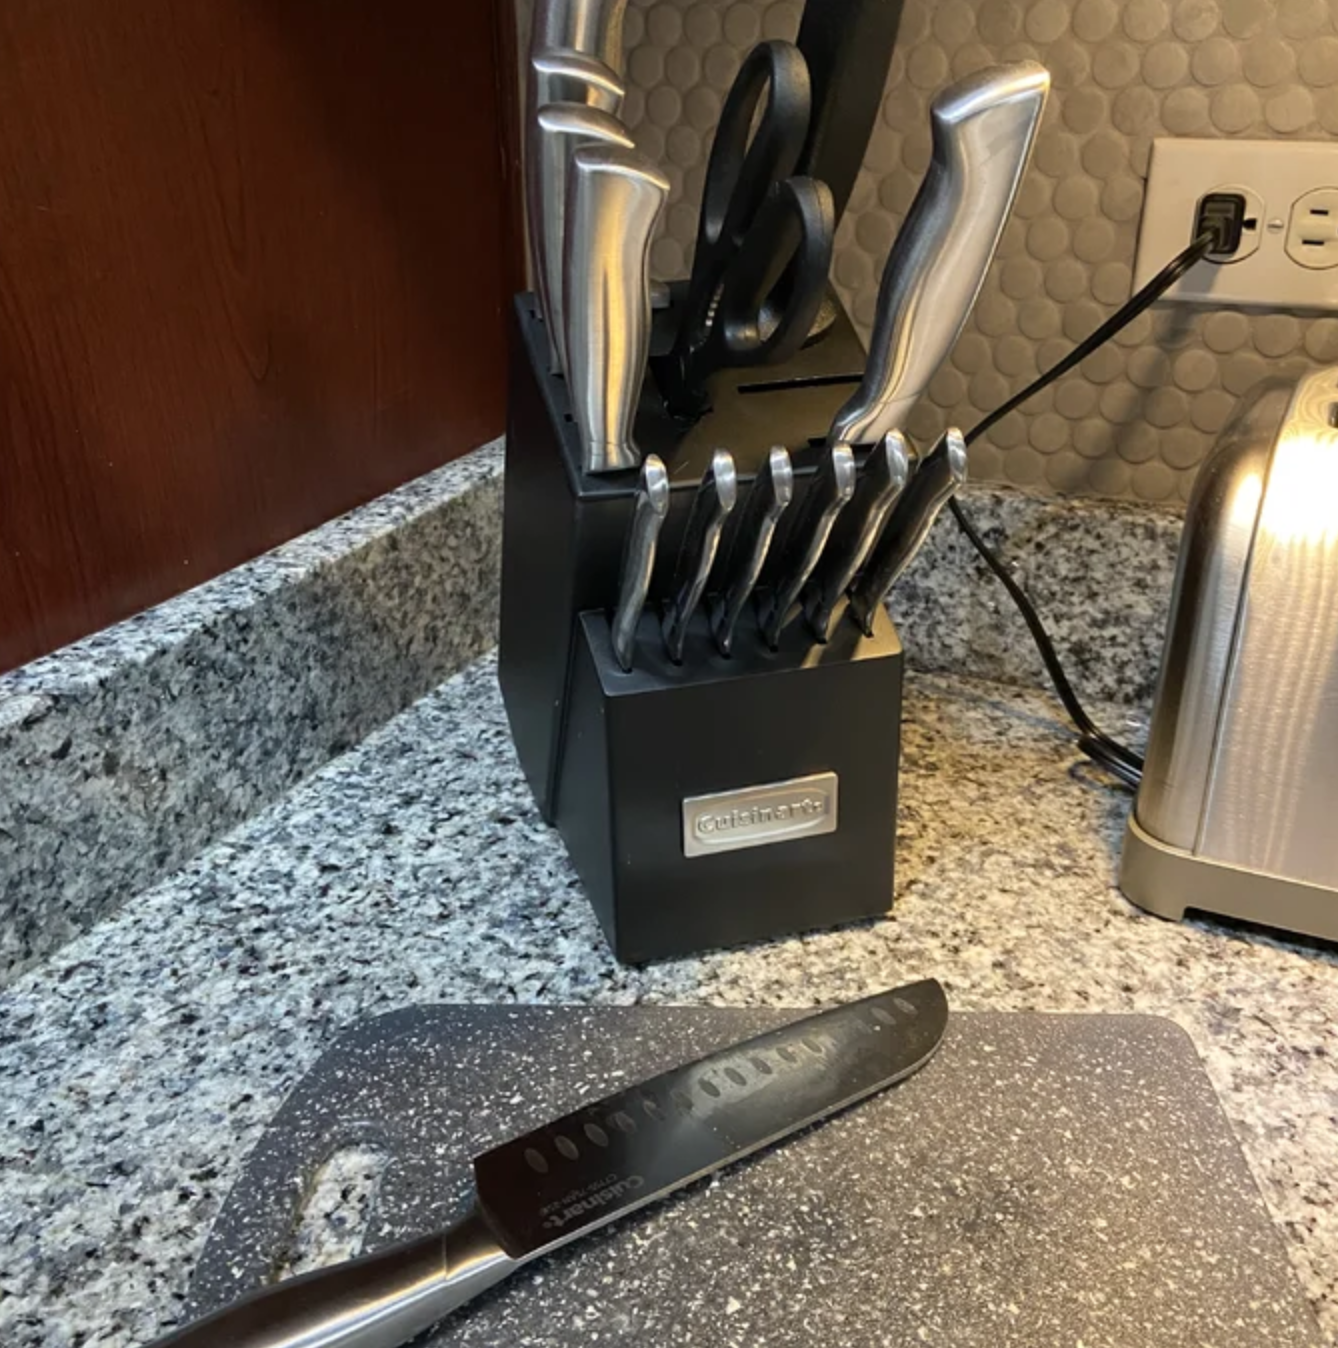 the full knife set in the black block with a knife on a cutting board in front of it